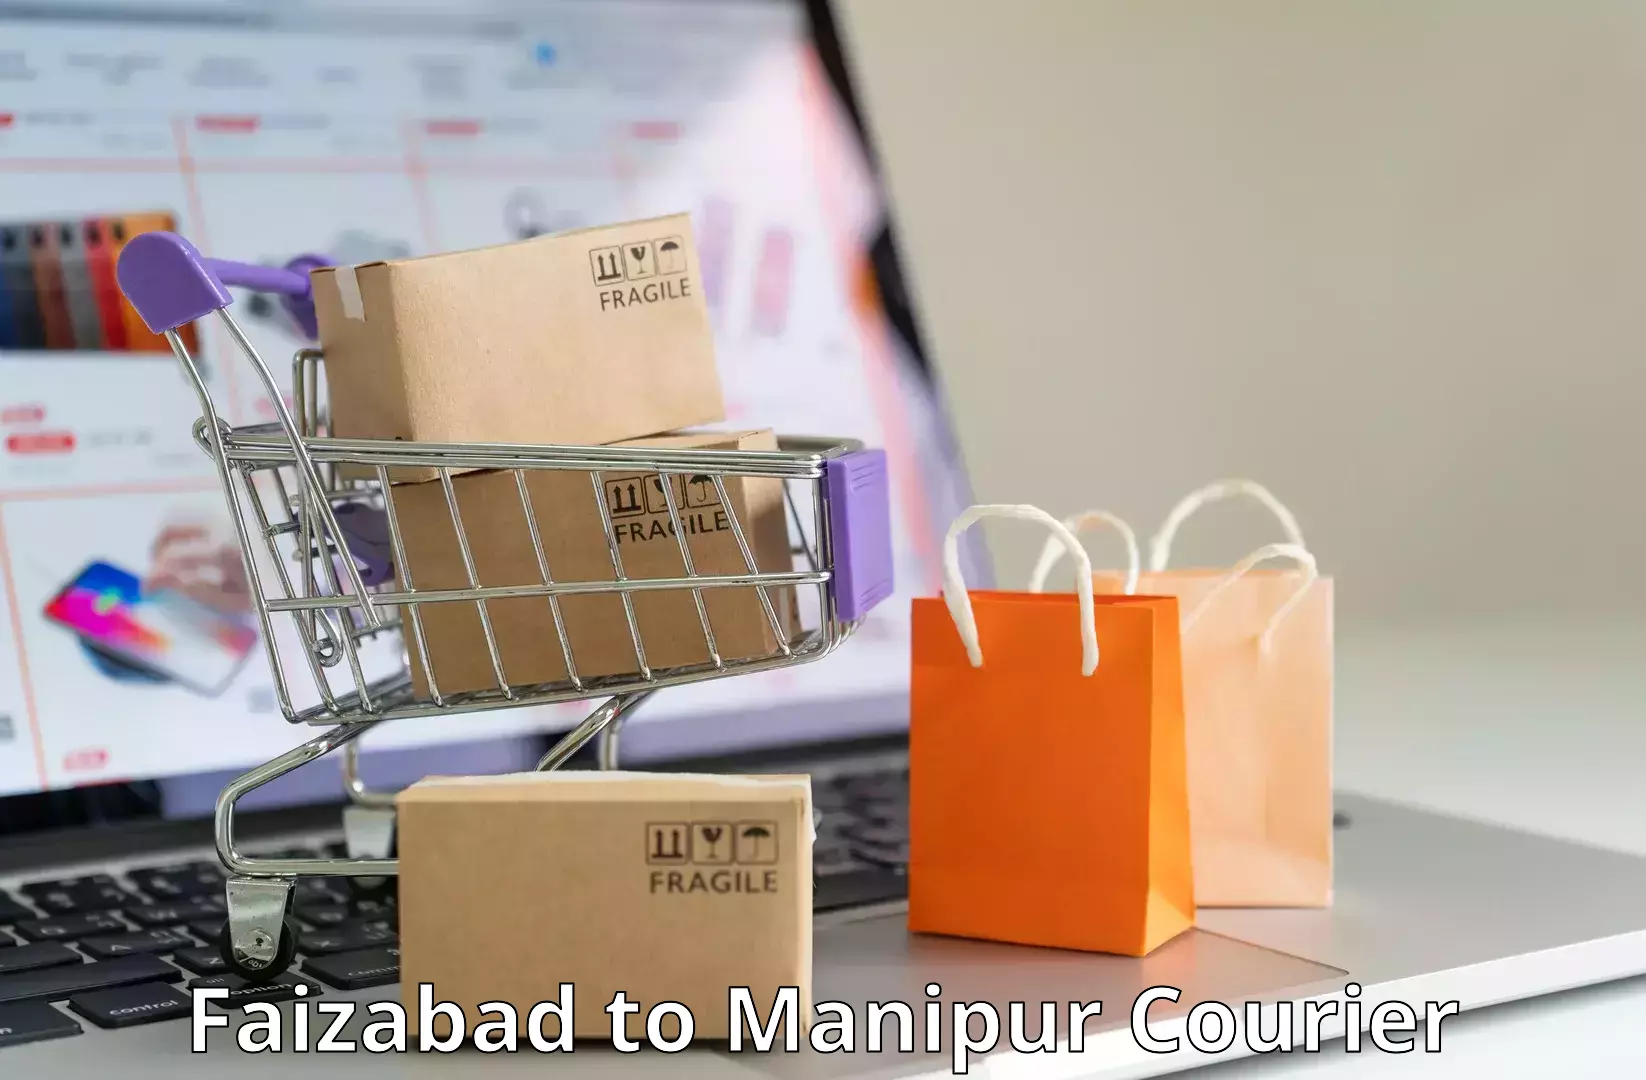 State-of-the-art courier technology Faizabad to Jiribam